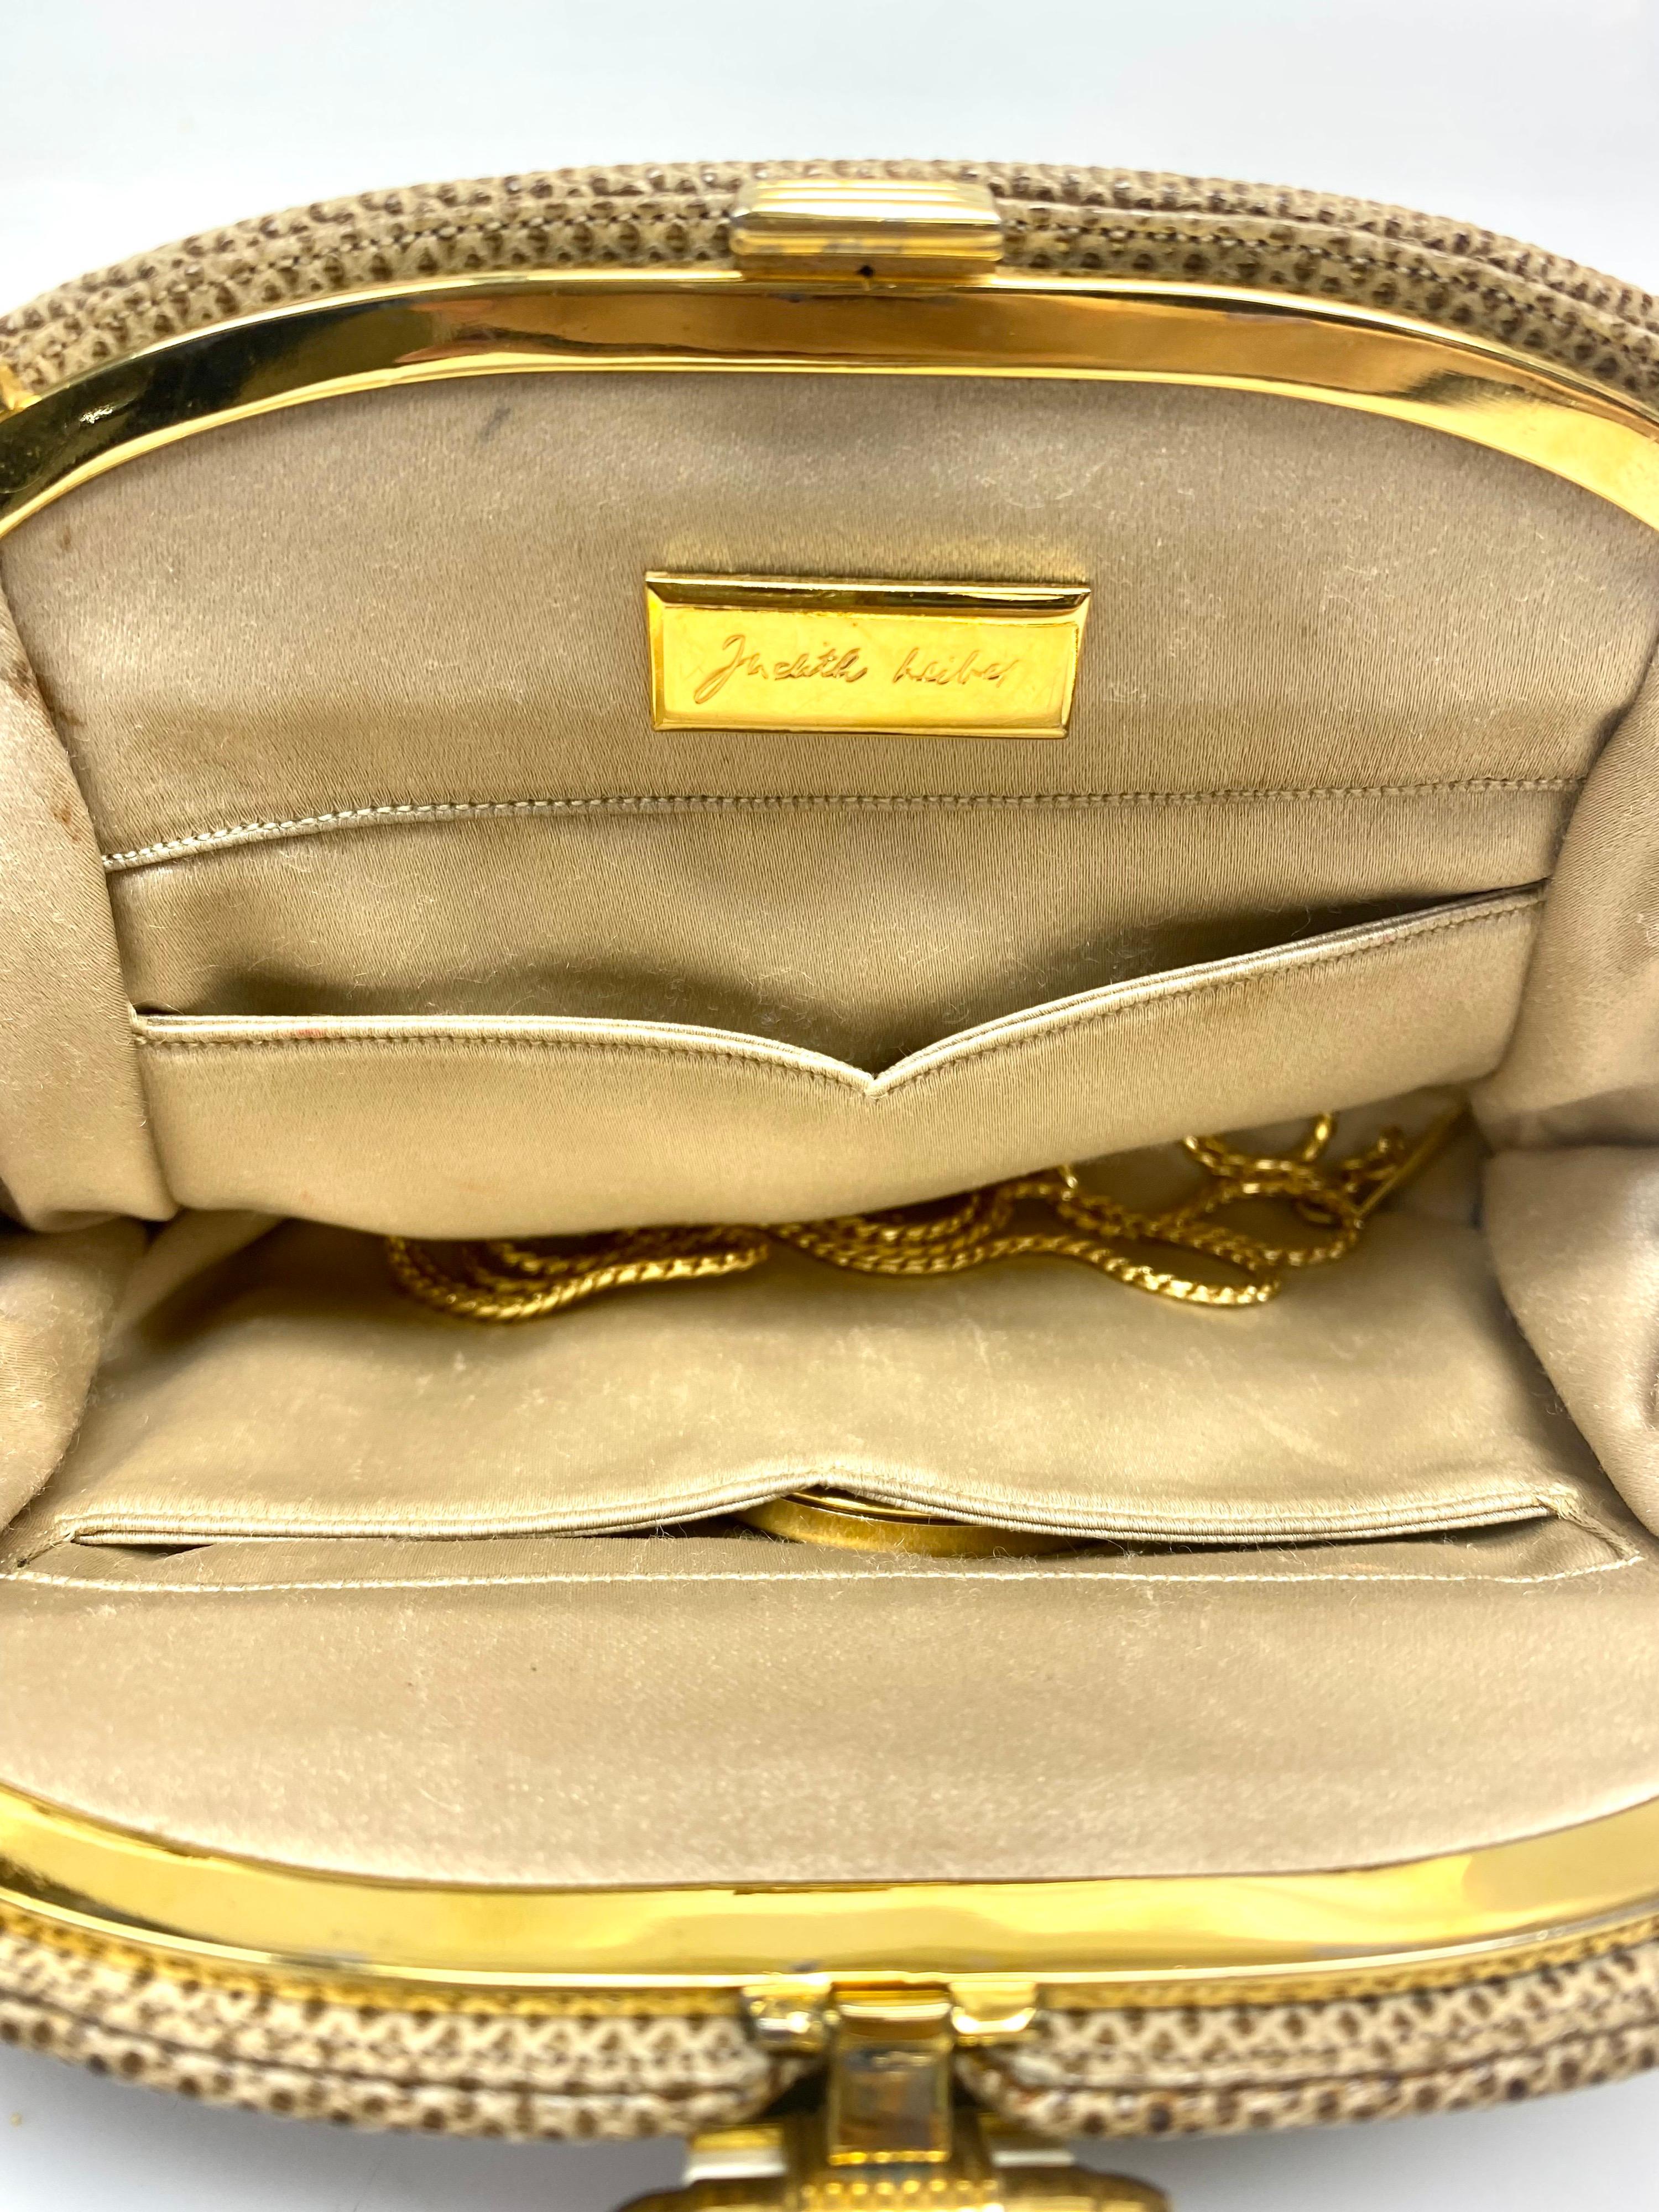 Women's Judith Leiber Tan Karung Snake Handbag with Stone Buckle Front.  For Sale